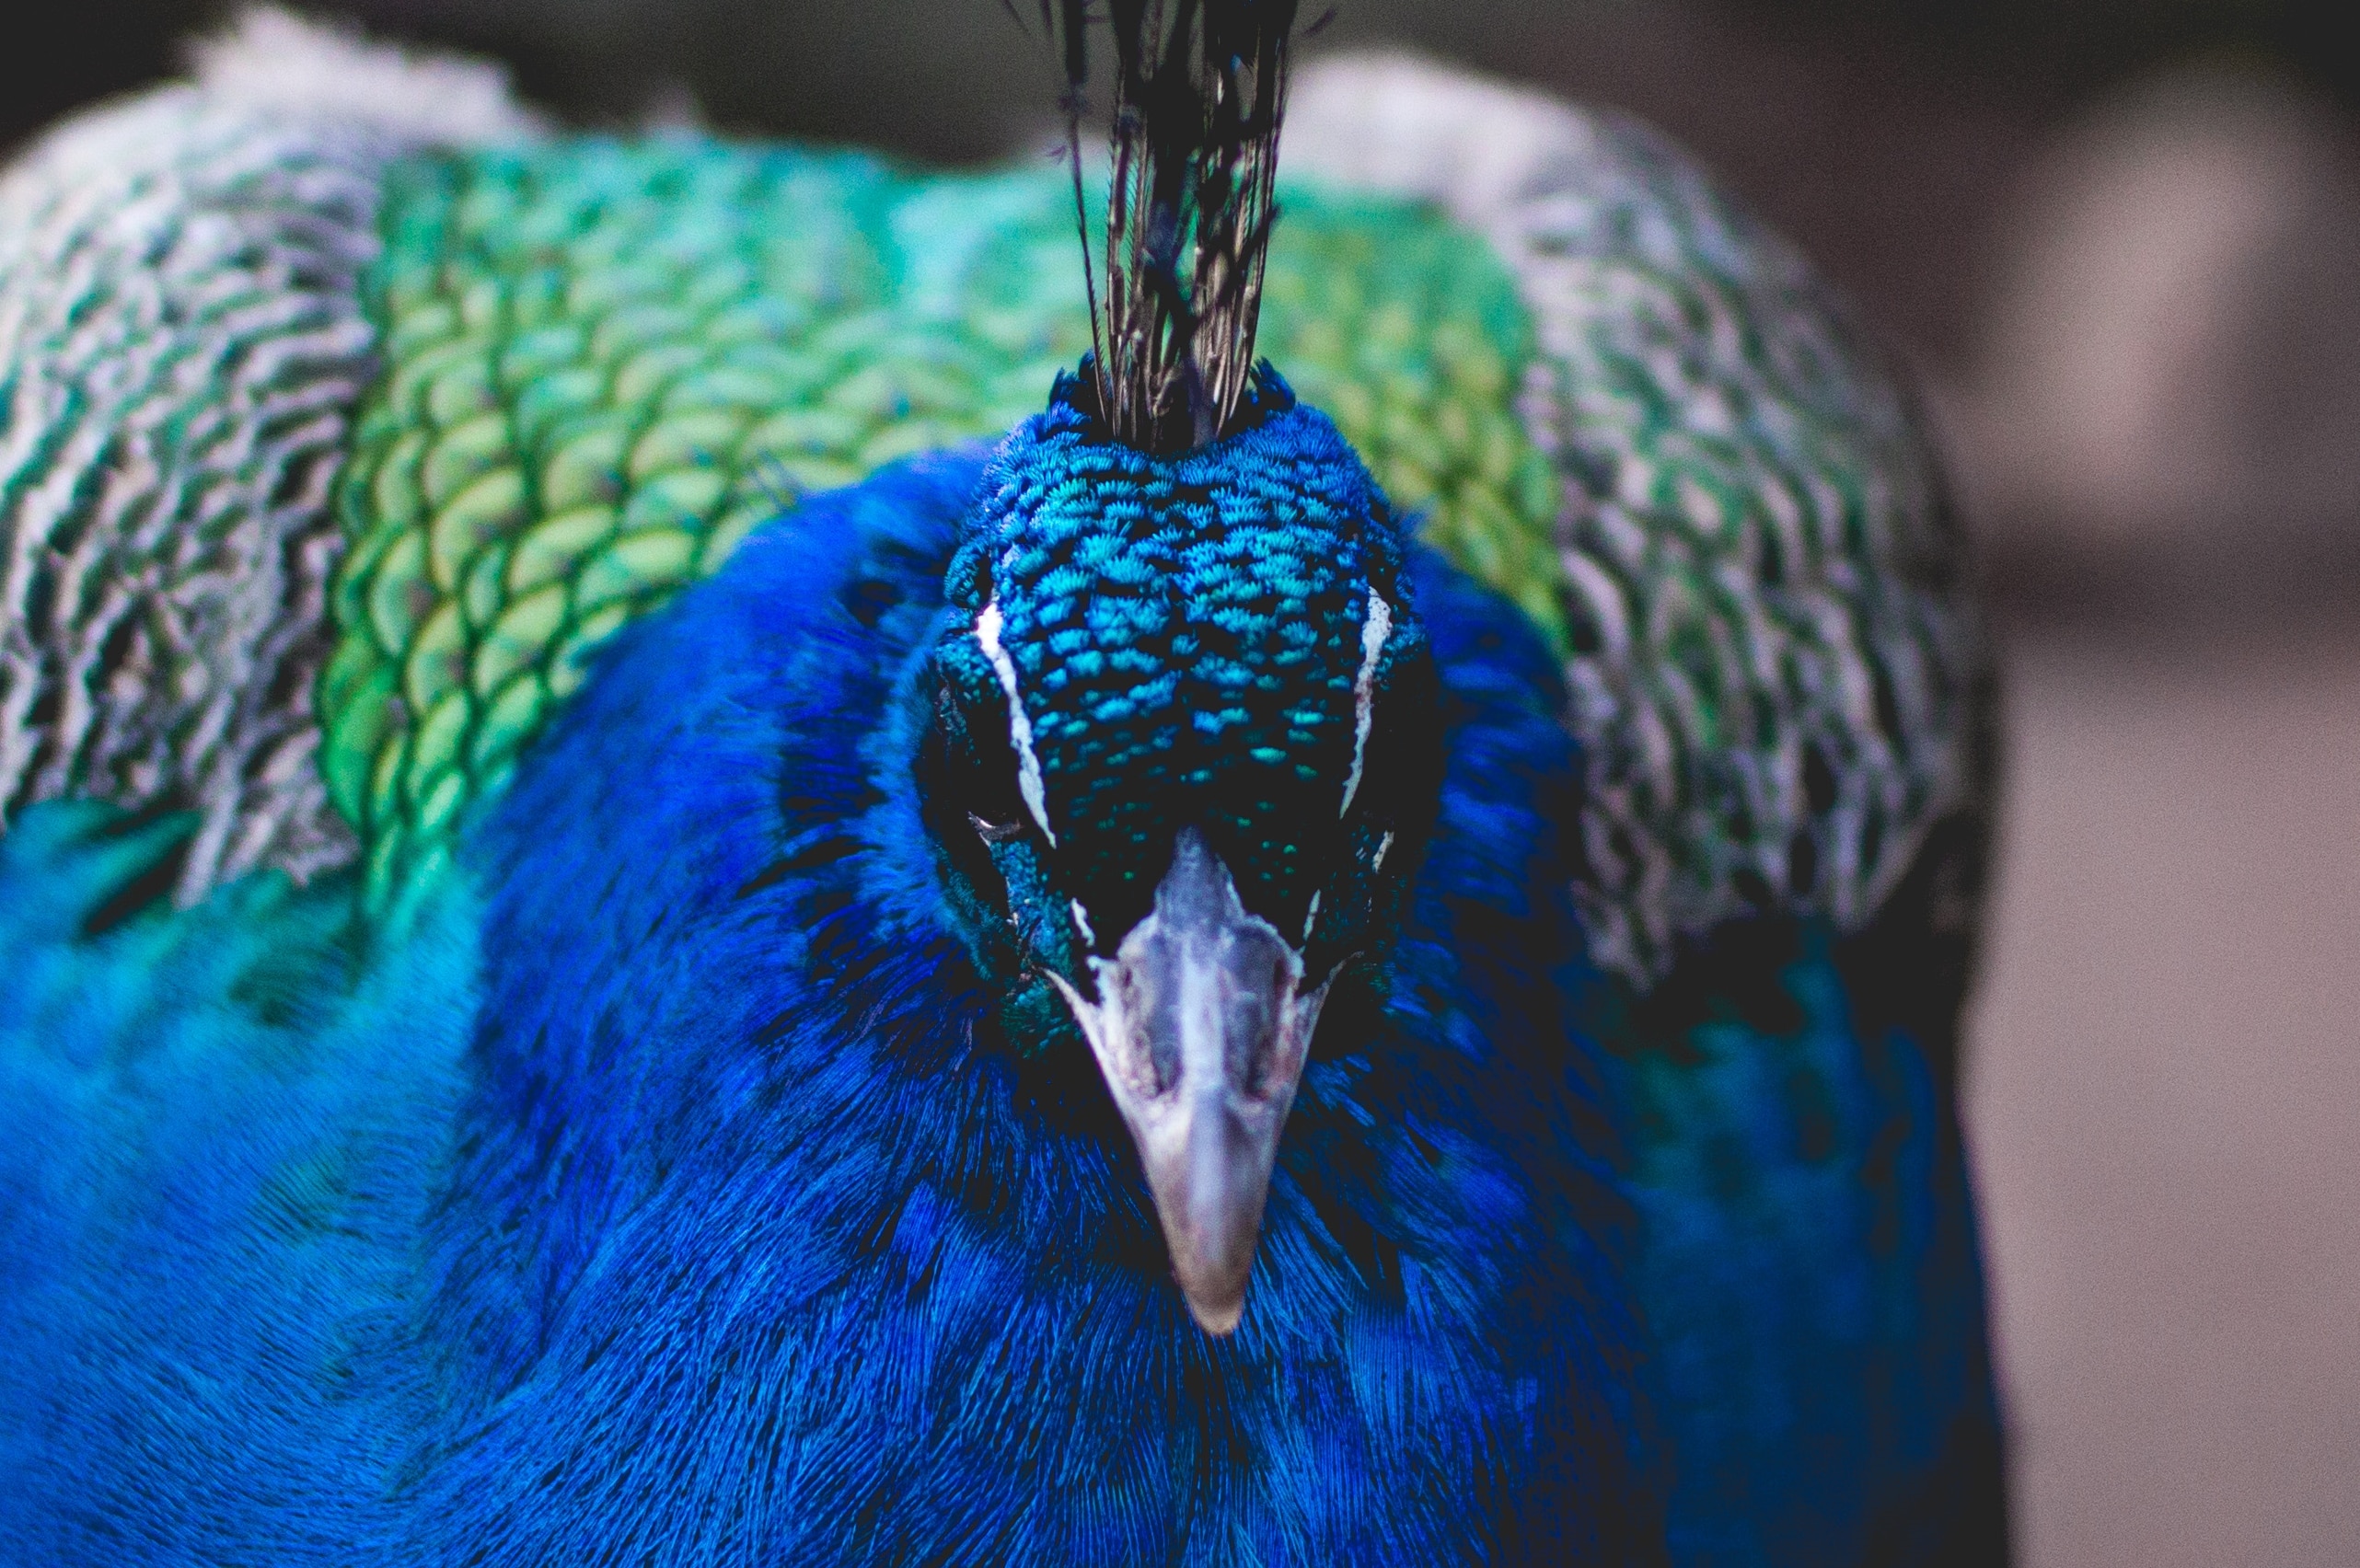 blue and green peacock close up photograph